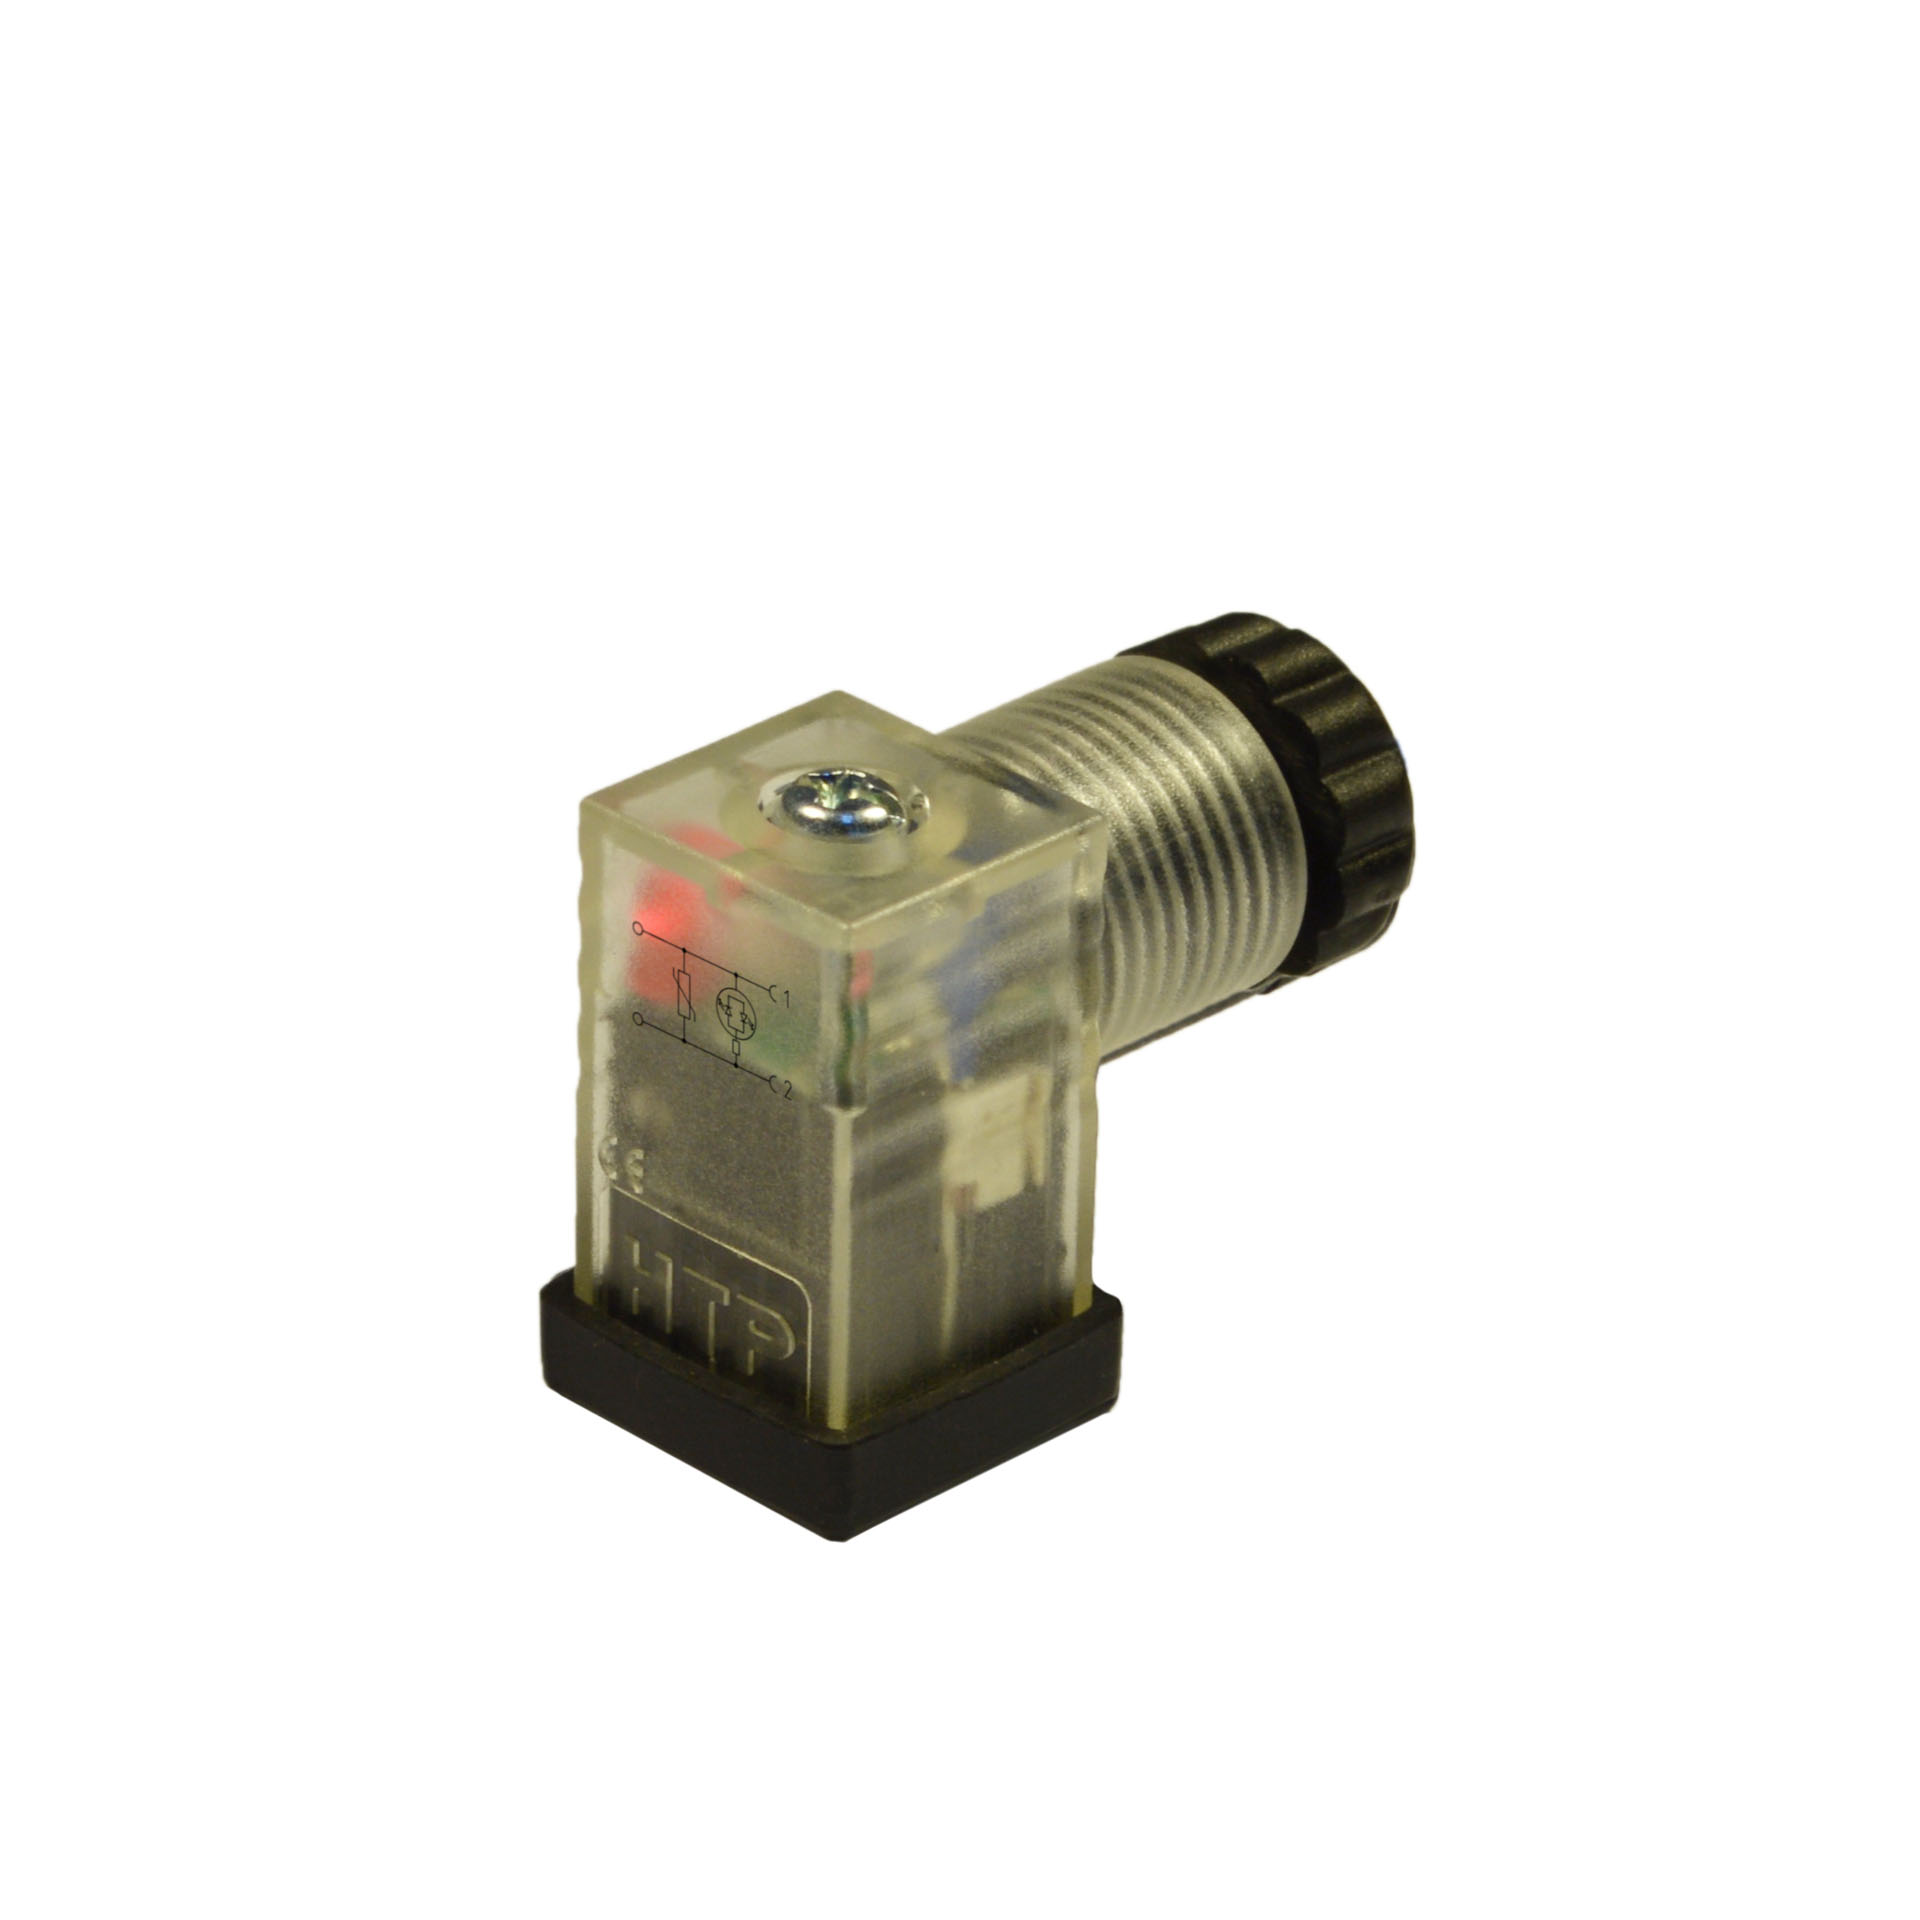 Industriale/C a cablare,2p+T(h.6),LED rosso+vdr,24VAC/DC,PG7